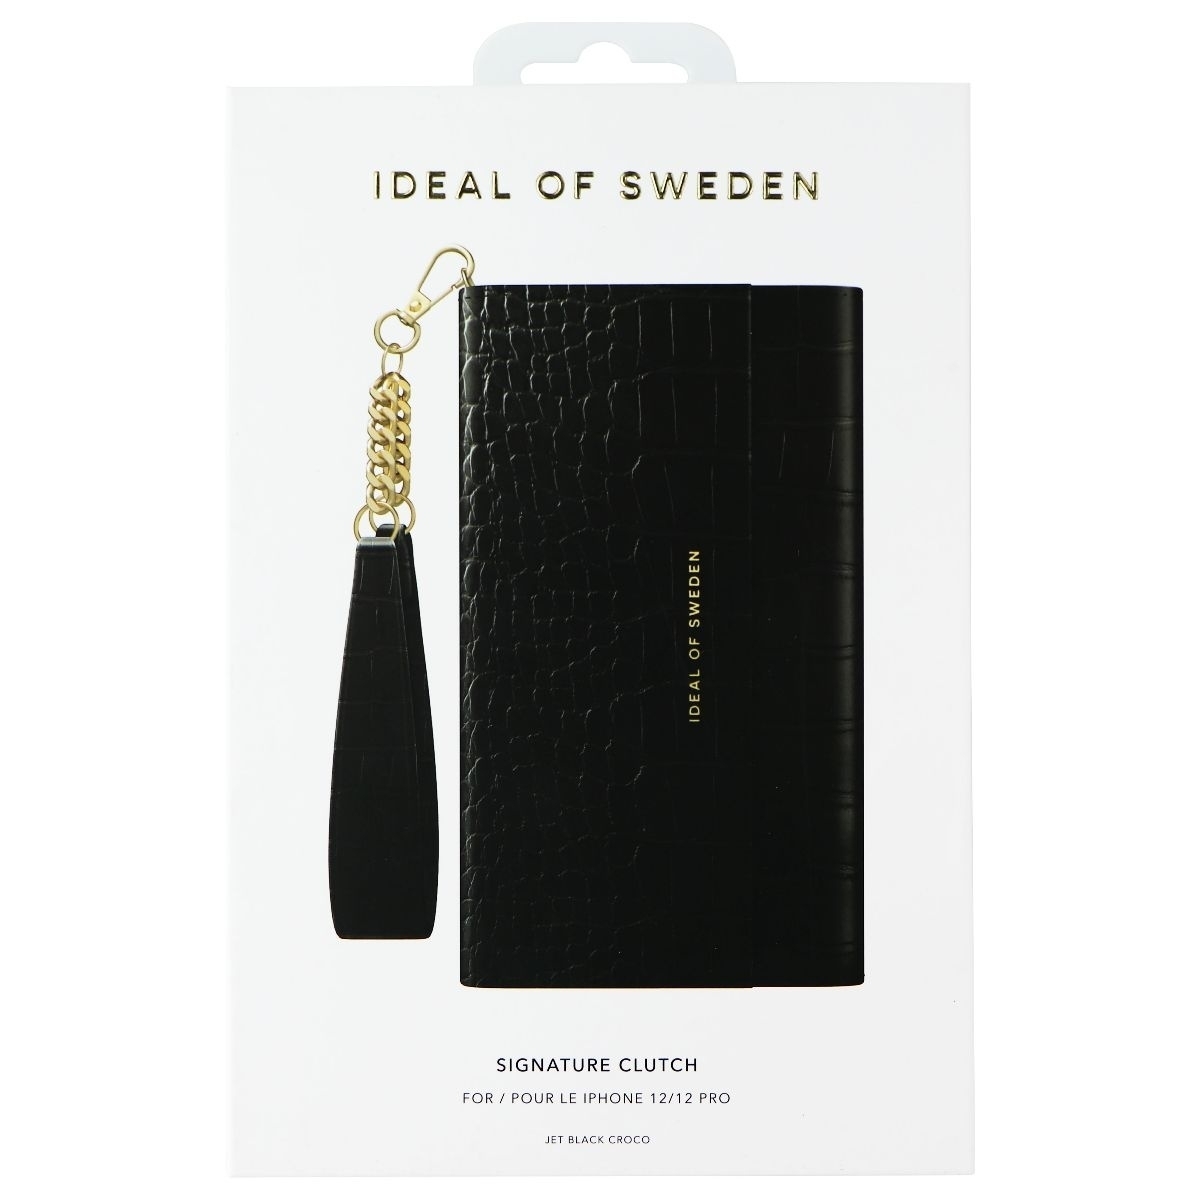 IDeal Of Sweden Signature Clutch Case For IPhone 12 And 12 Pro - Jet Black Croco